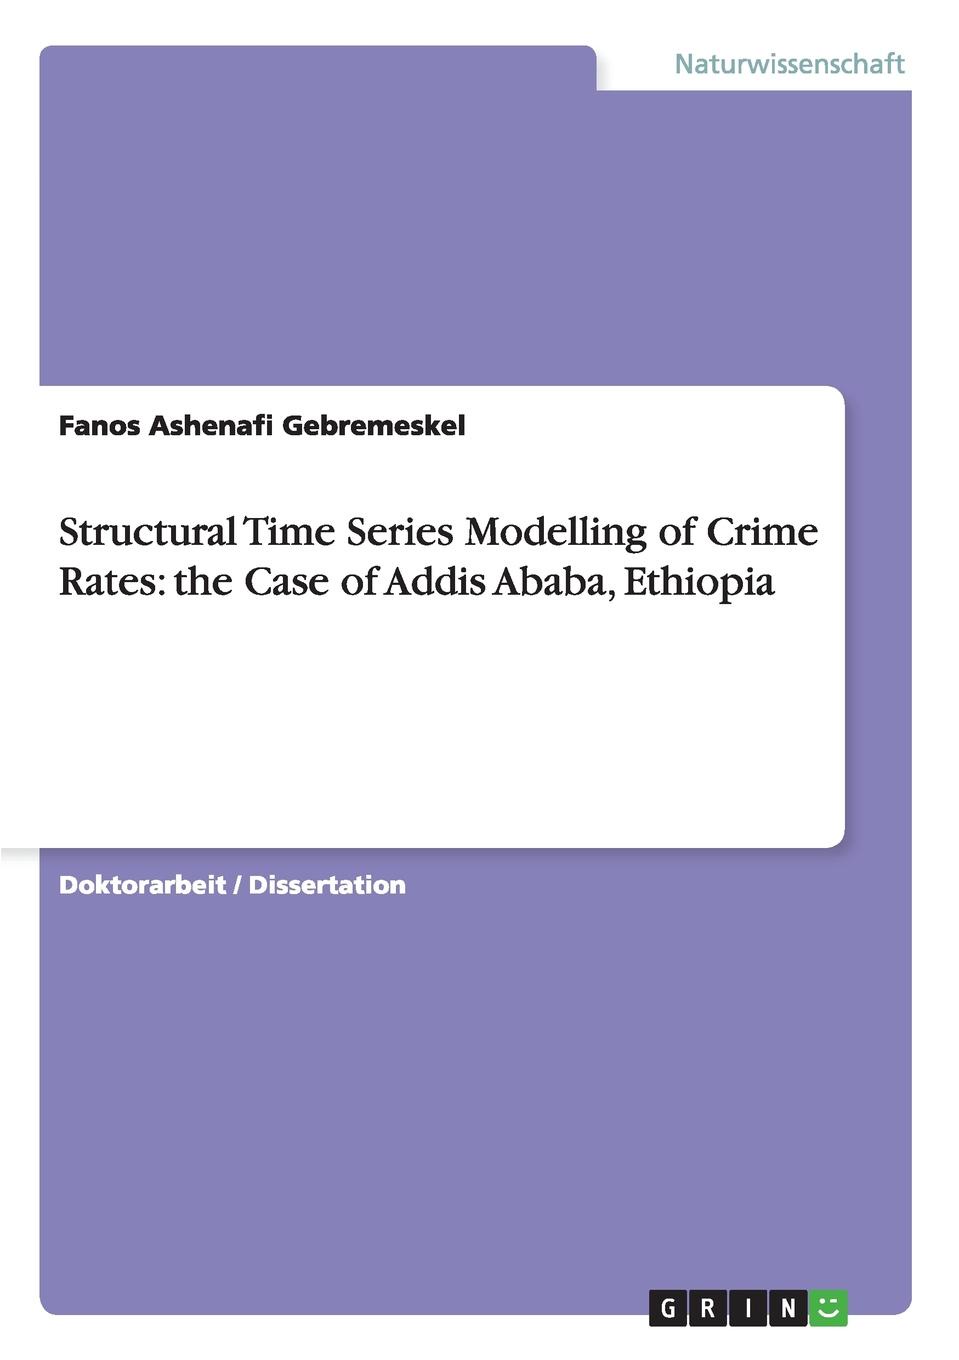 Fanos Ashenafi Gebremeskel Structural Time Series Modelling of Crime Rates. the Case of Addis Ababa, Ethiopia